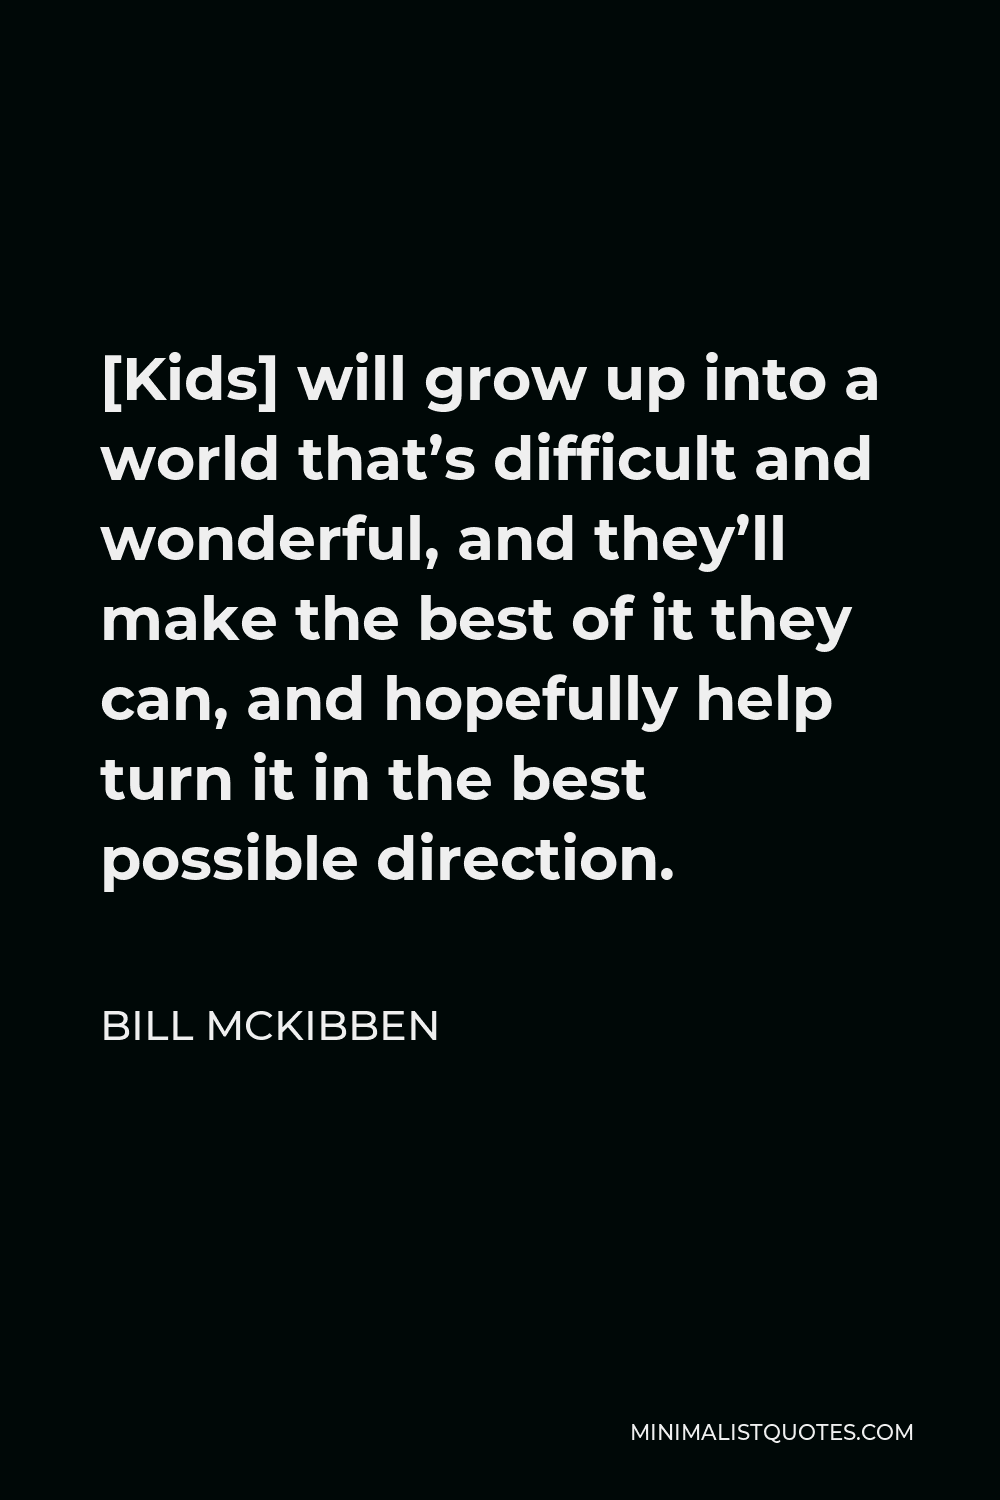 Bill McKibben Quote - [Kids] will grow up into a world that’s difficult and wonderful, and they’ll make the best of it they can, and hopefully help turn it in the best possible direction.